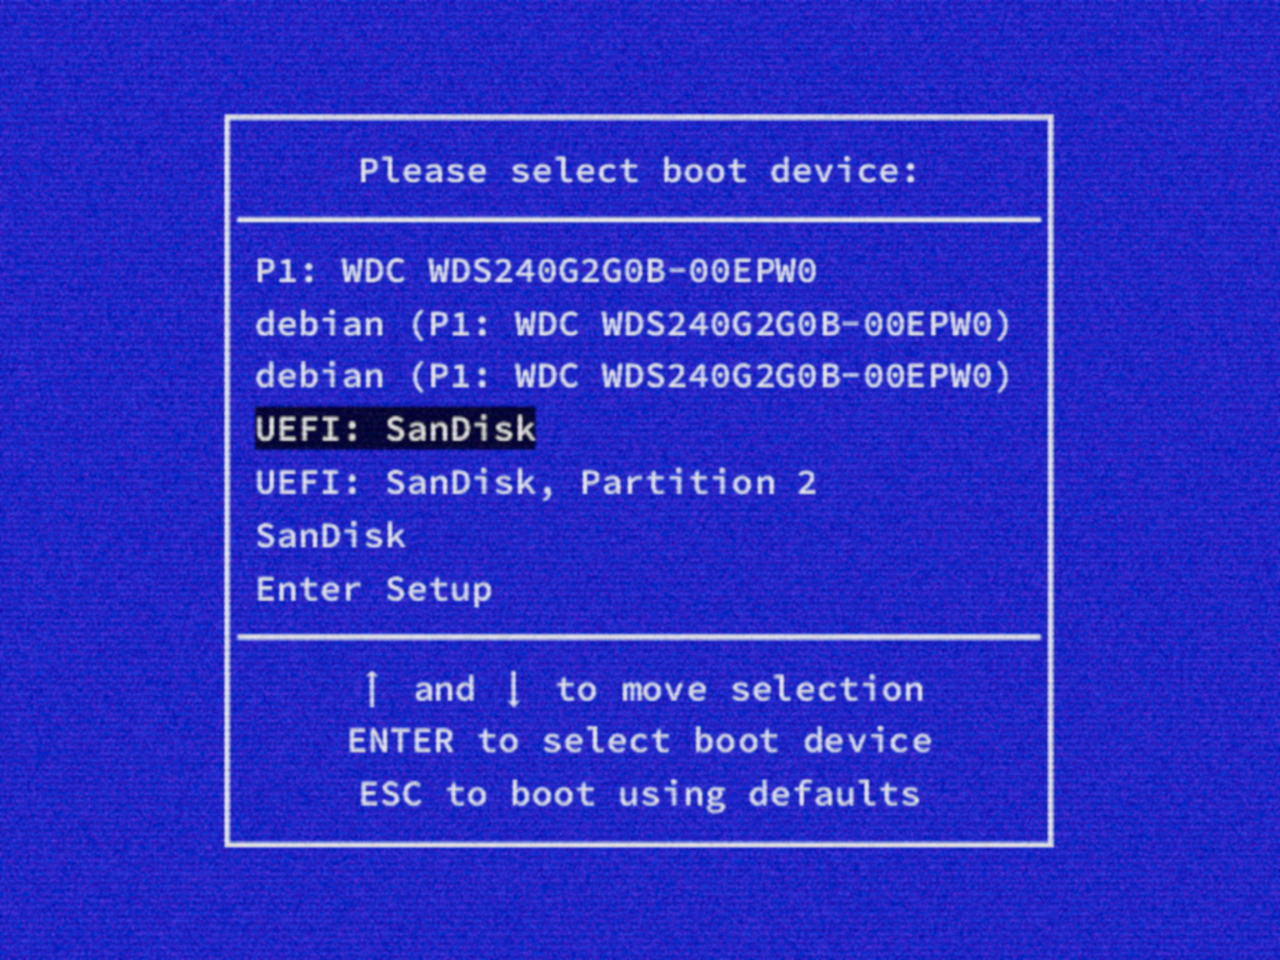 My first Linux laptop - Booting the laptop from USB media in boot menu options to install Debian